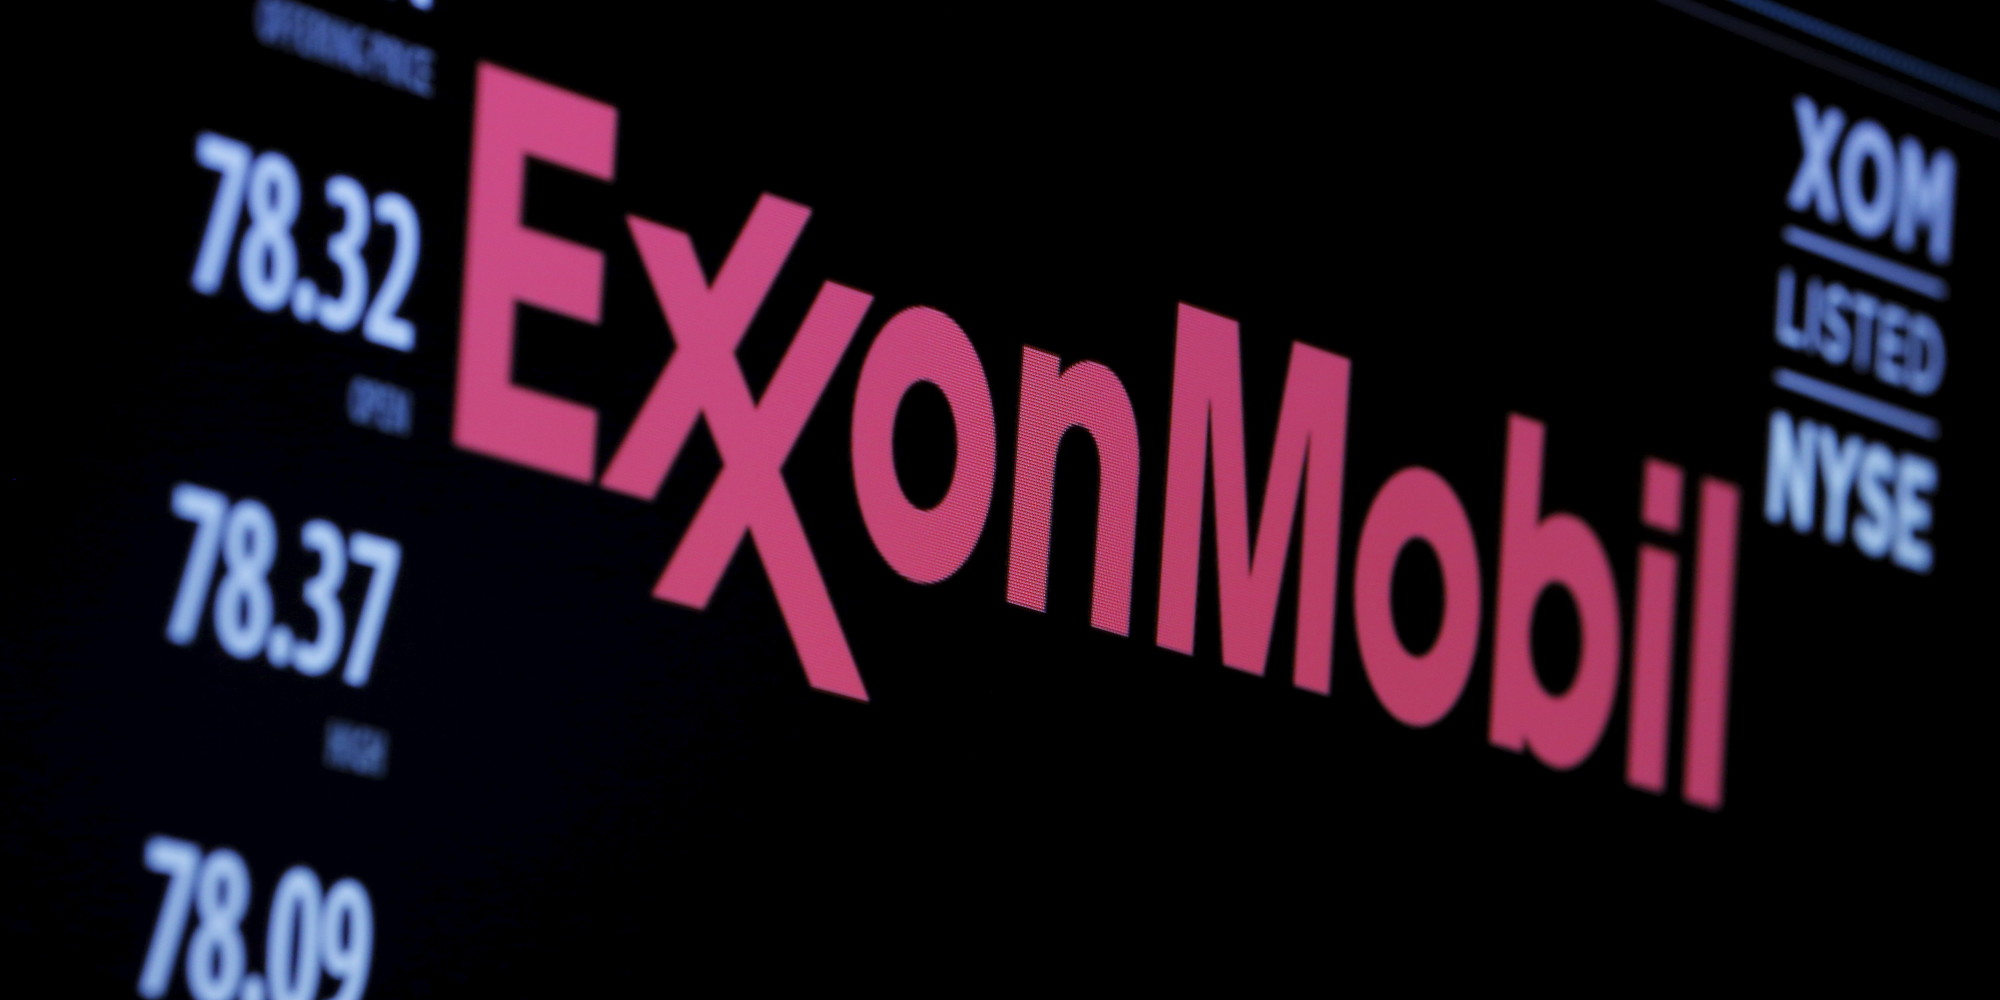 exxonmobil-s-latest-campaign-to-stymie-federal-climate-action-huffpost